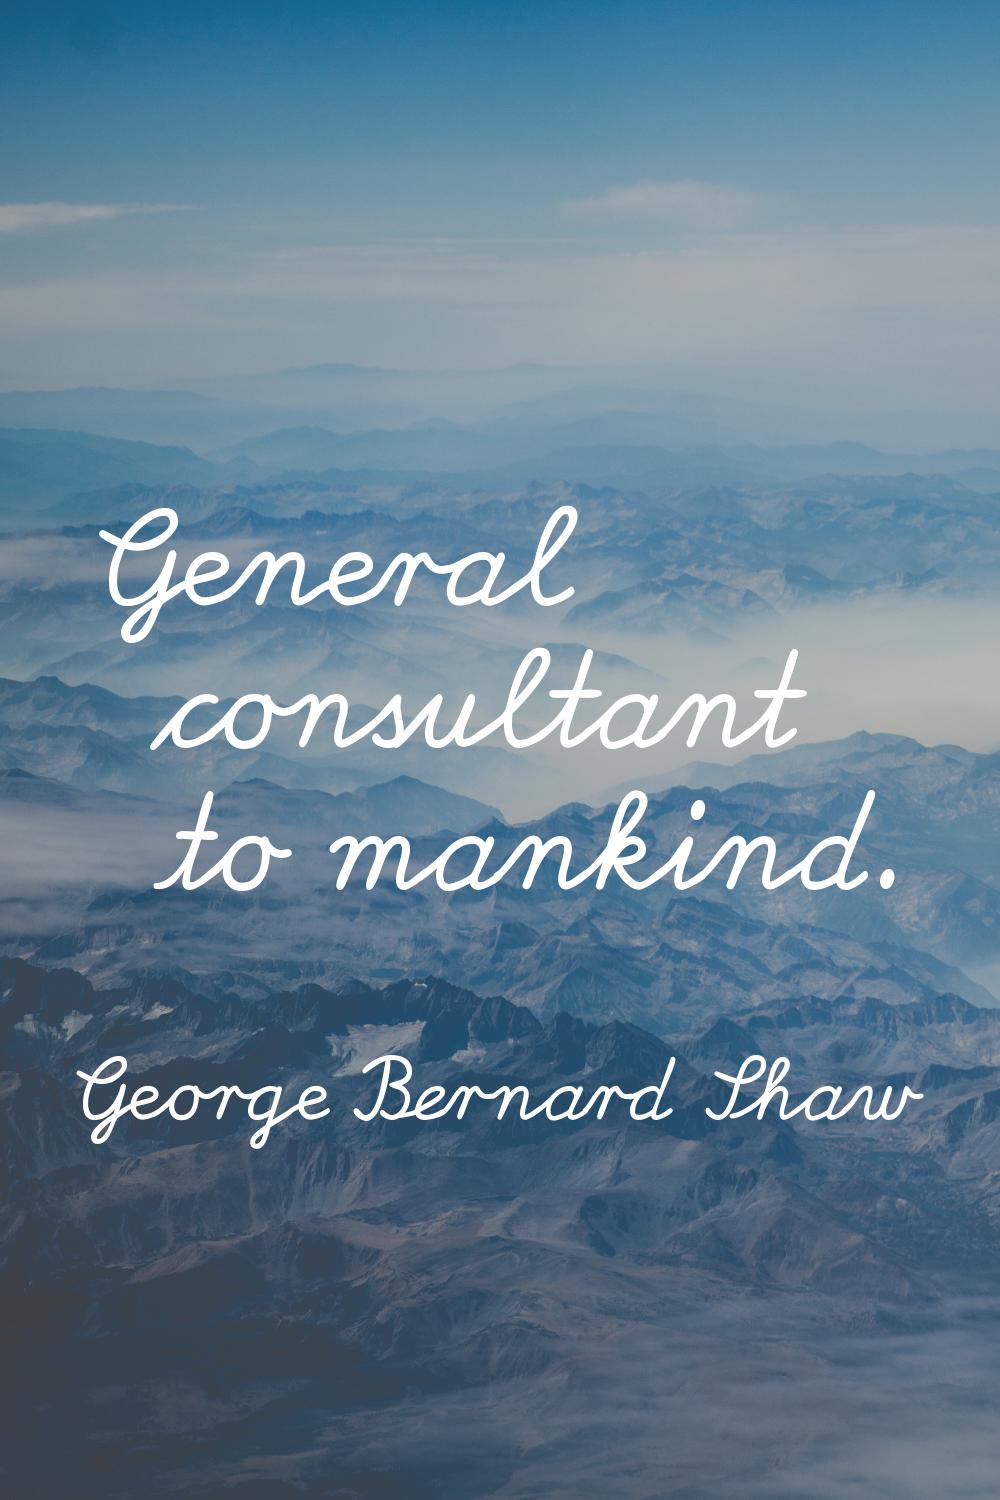 General consultant to mankind.